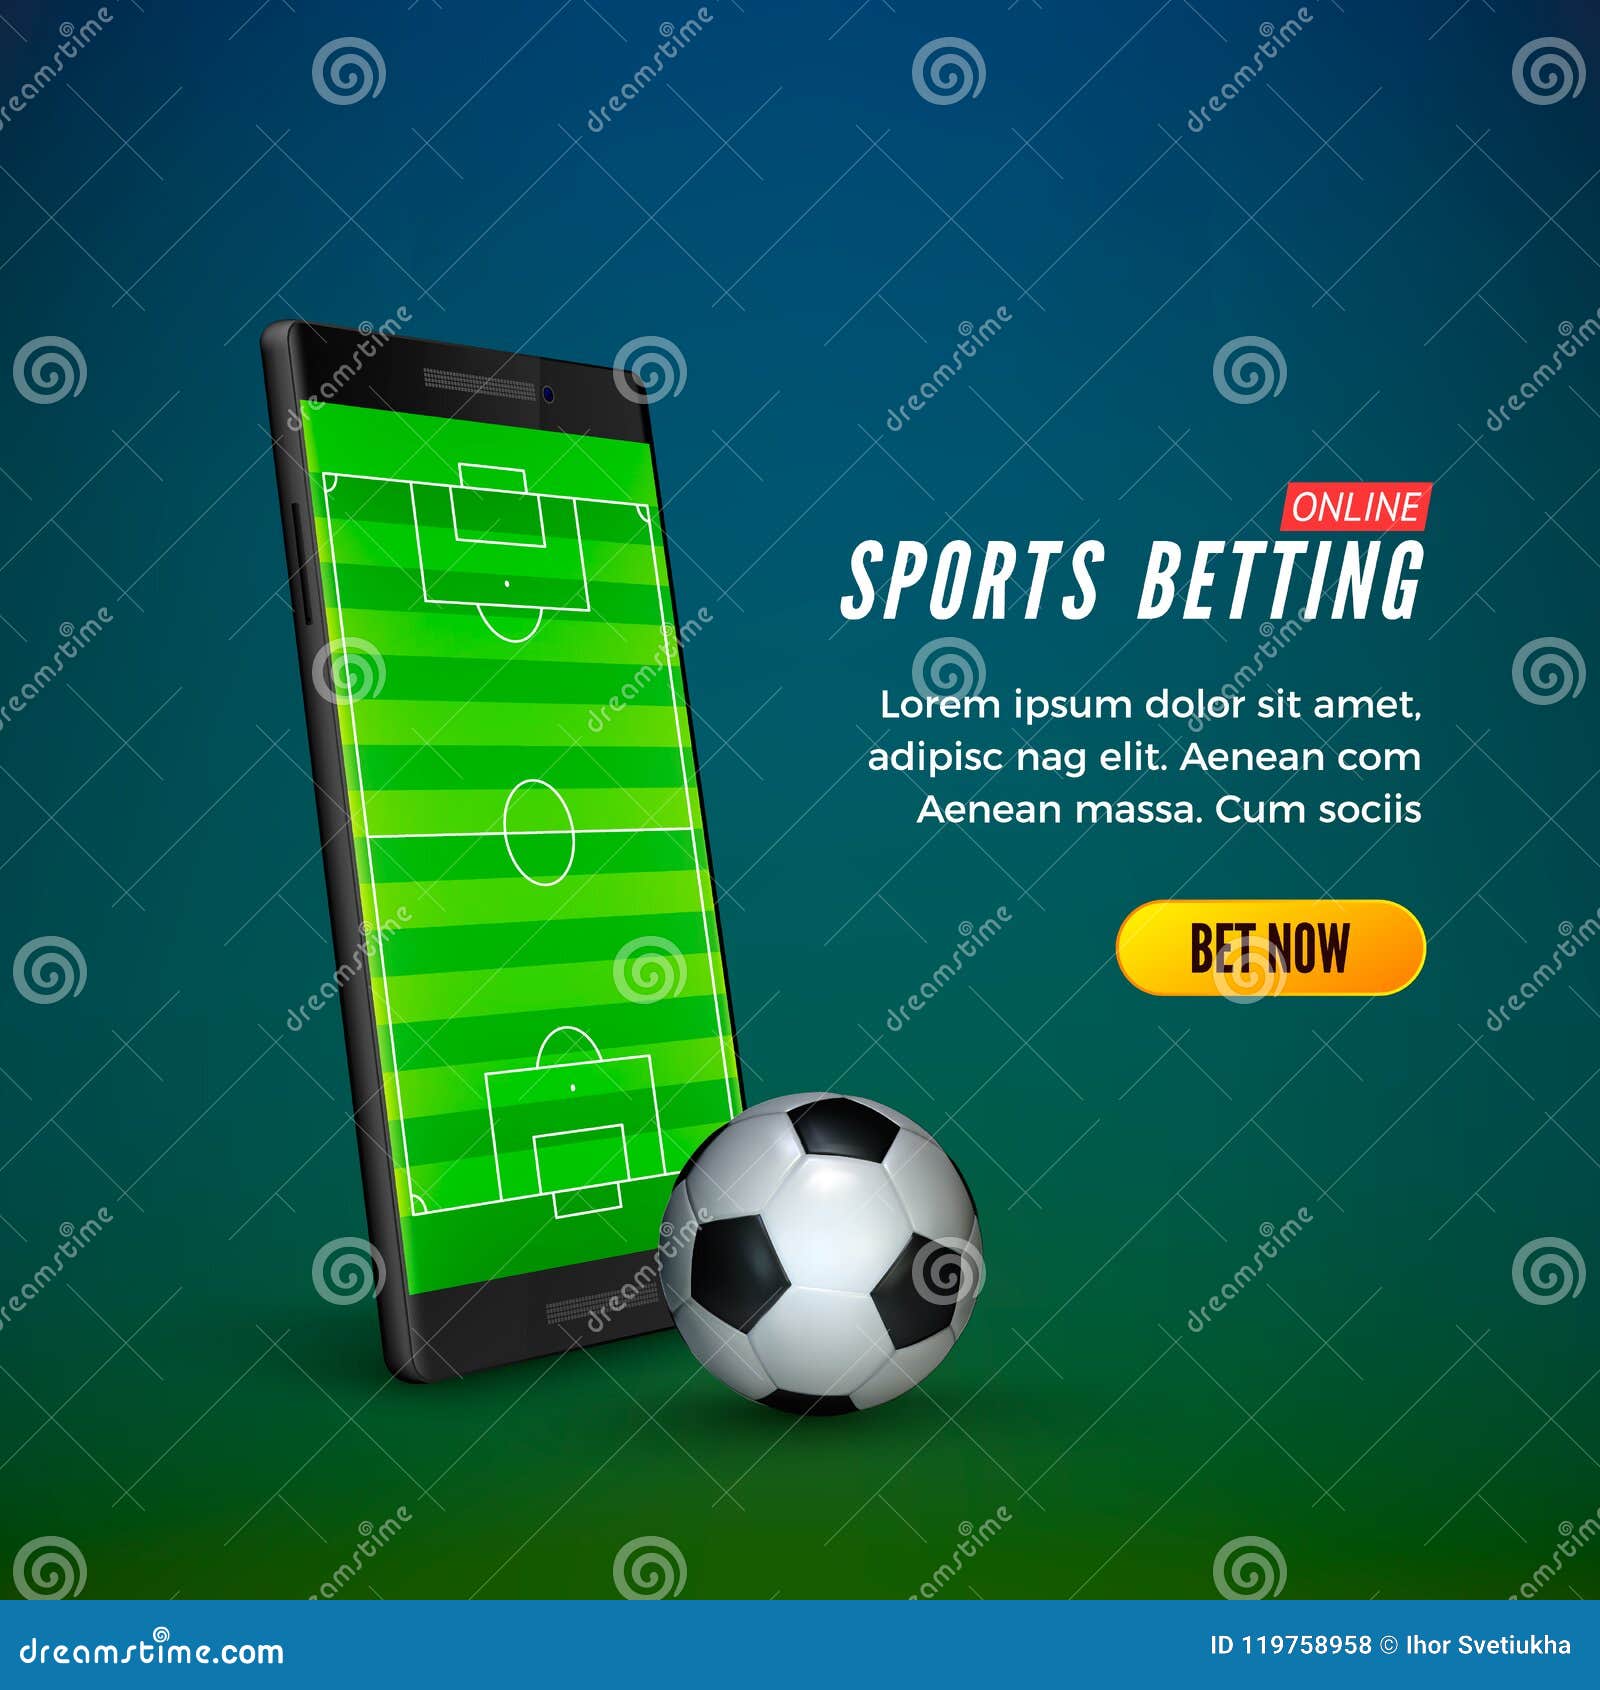 Sports Betting Online Web Banner Template